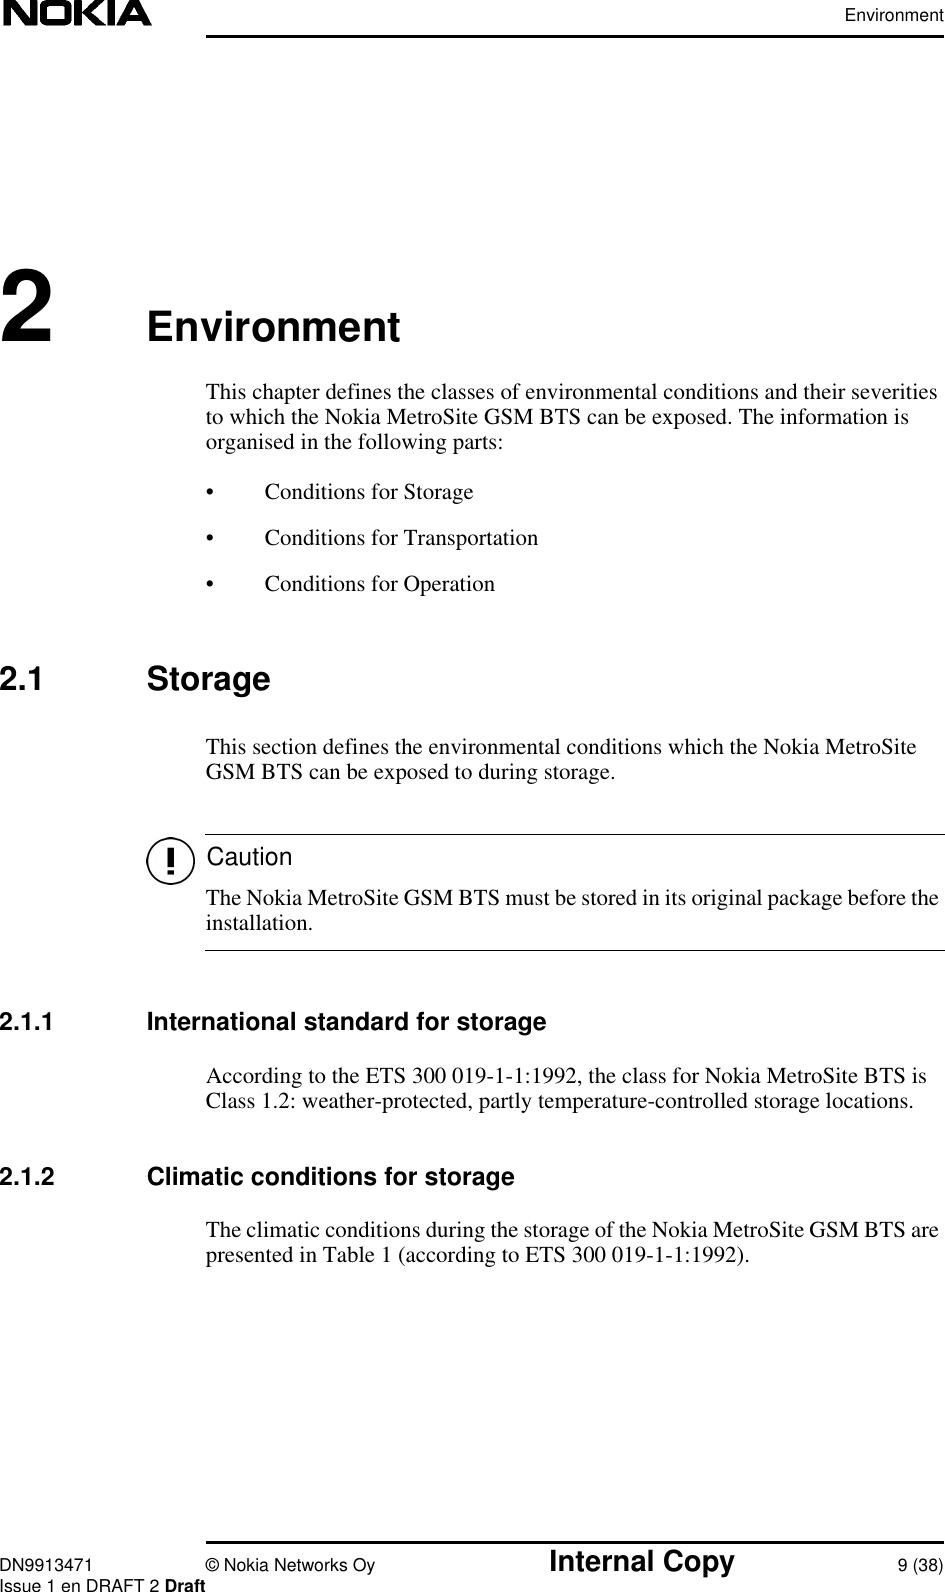 EnvironmentDN9913471 © Nokia Networks Oy Internal Copy 9 (38)Issue 1 en DRAFT 2 DraftCaution2EnvironmentThis chapter defines the classes of environmental conditions and their severitiesto which the Nokia MetroSite GSM BTS can be exposed. The information isorganised in the following parts:• Conditions for Storage• Conditions for Transportation• Conditions for Operation2.1 StorageThis section defines the environmental conditions which the Nokia MetroSiteGSM BTS can be exposed to during storage.The Nokia MetroSite GSM BTS must be stored in its original package before theinstallation.2.1.1 International standard for storageAccording to the ETS 300 019-1-1:1992, the class for Nokia MetroSite BTS isClass 1.2: weather-protected, partly temperature-controlled storage locations.2.1.2 Climatic conditions for storageThe climatic conditions during the storage of the Nokia MetroSite GSM BTS arepresented in Table 1 (according to ETS 300 019-1-1:1992).